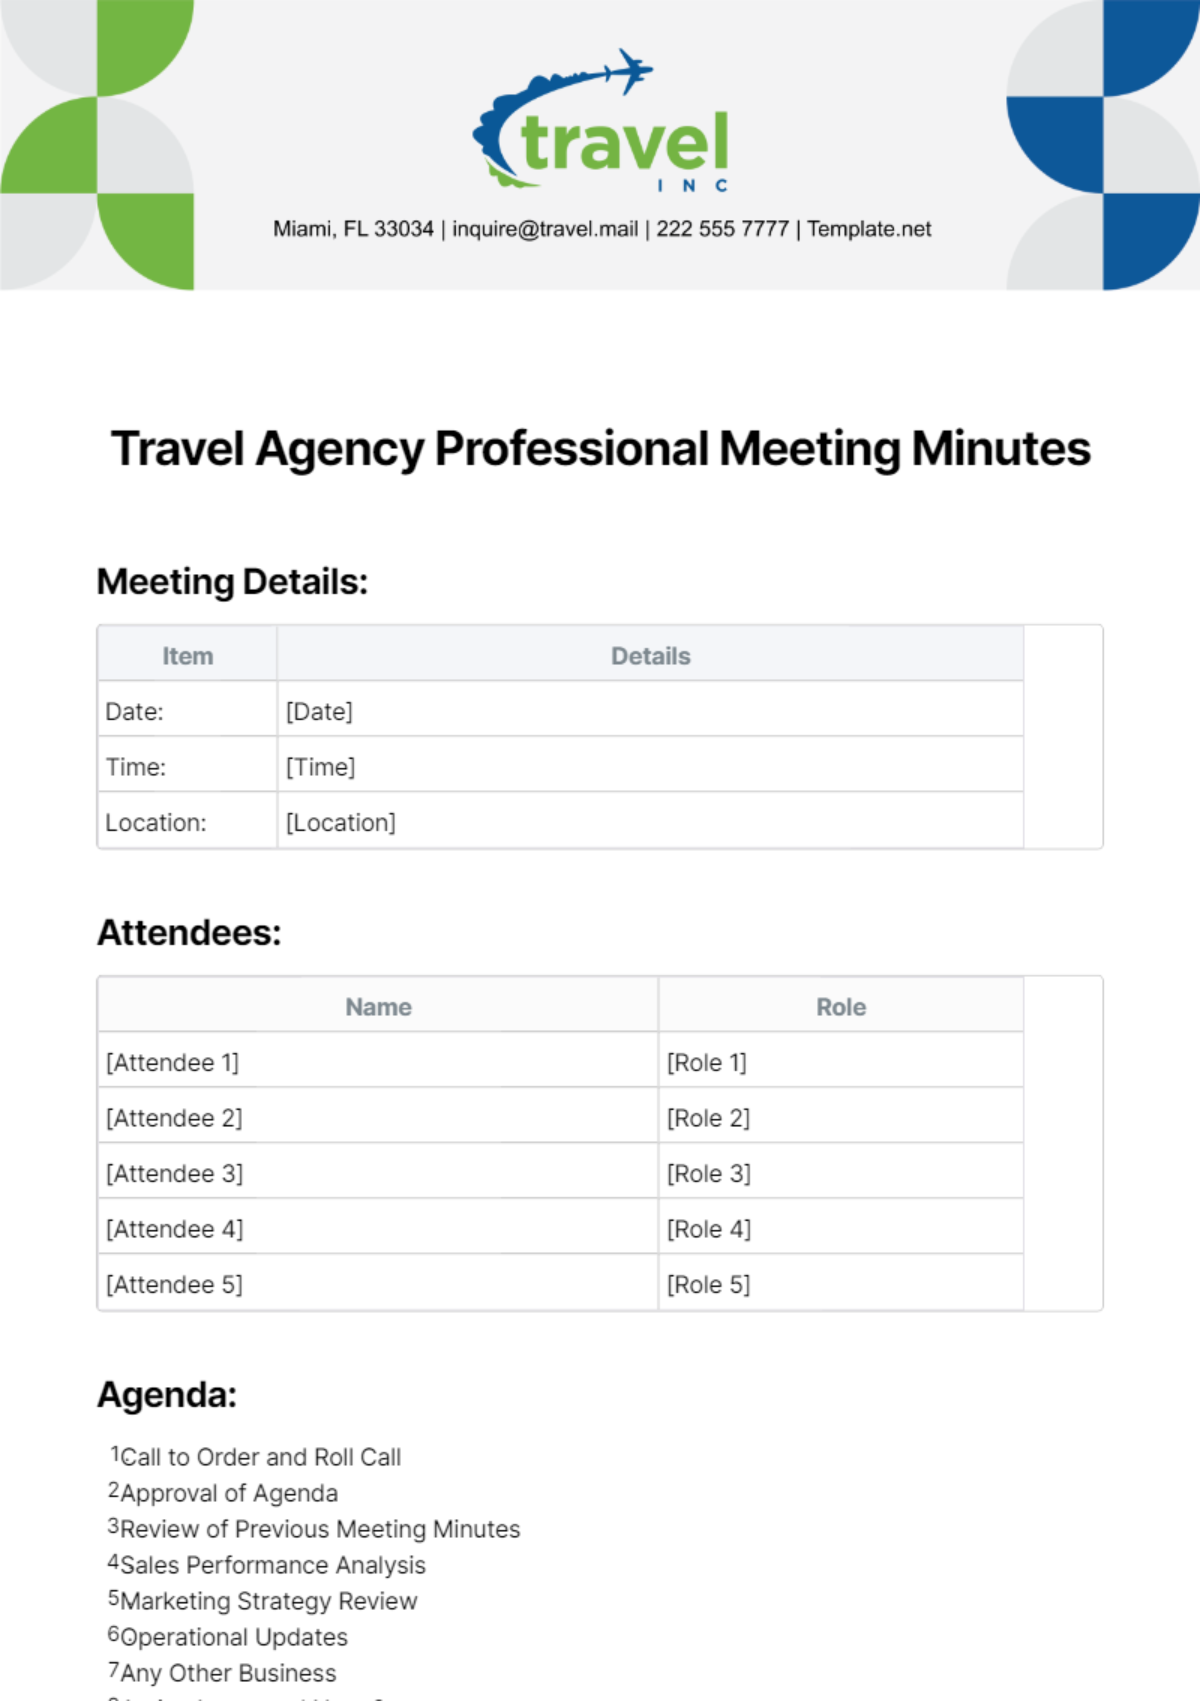 Travel Agency Professional Meeting Minutes Template